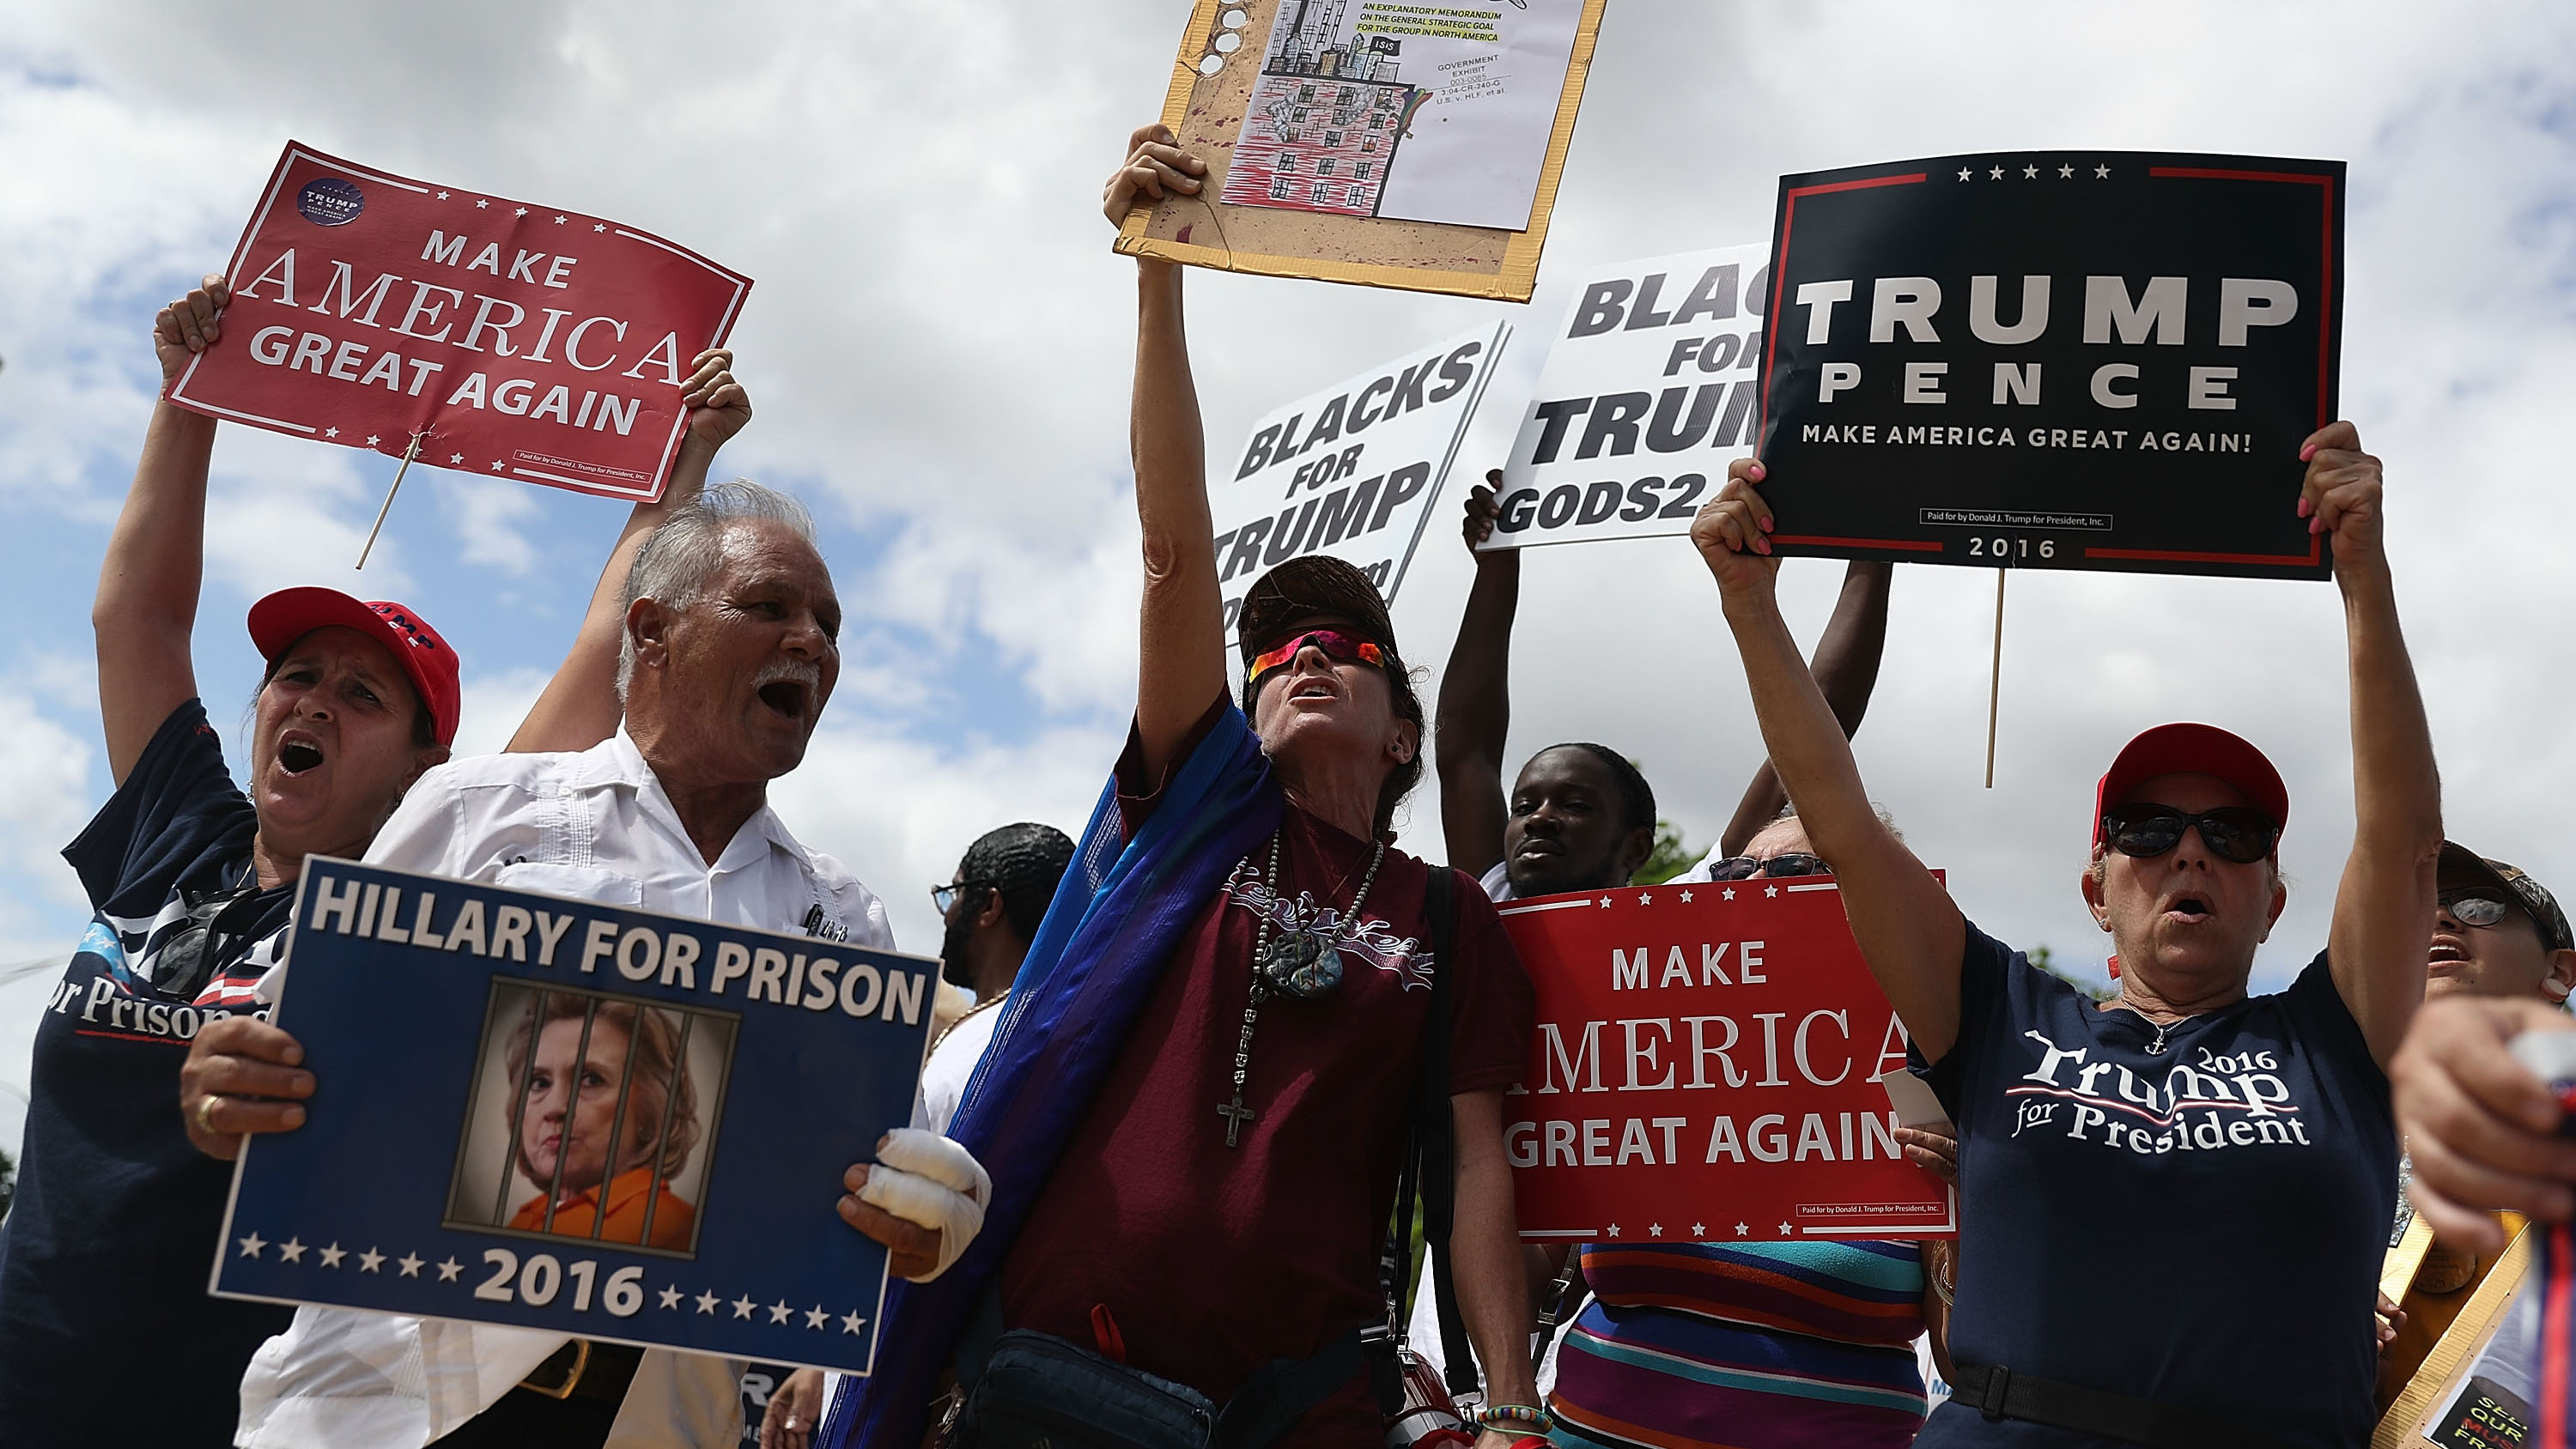 Supporters of Republican presidential nominee Donald Trump show their support for him before the start of the campaign event for Democratic presidential nominee Hillary Clinton at the Miami Dade College - Kendall Campus, Theodore Gibson Center on October 11, 2016 in Miami, Florida.
